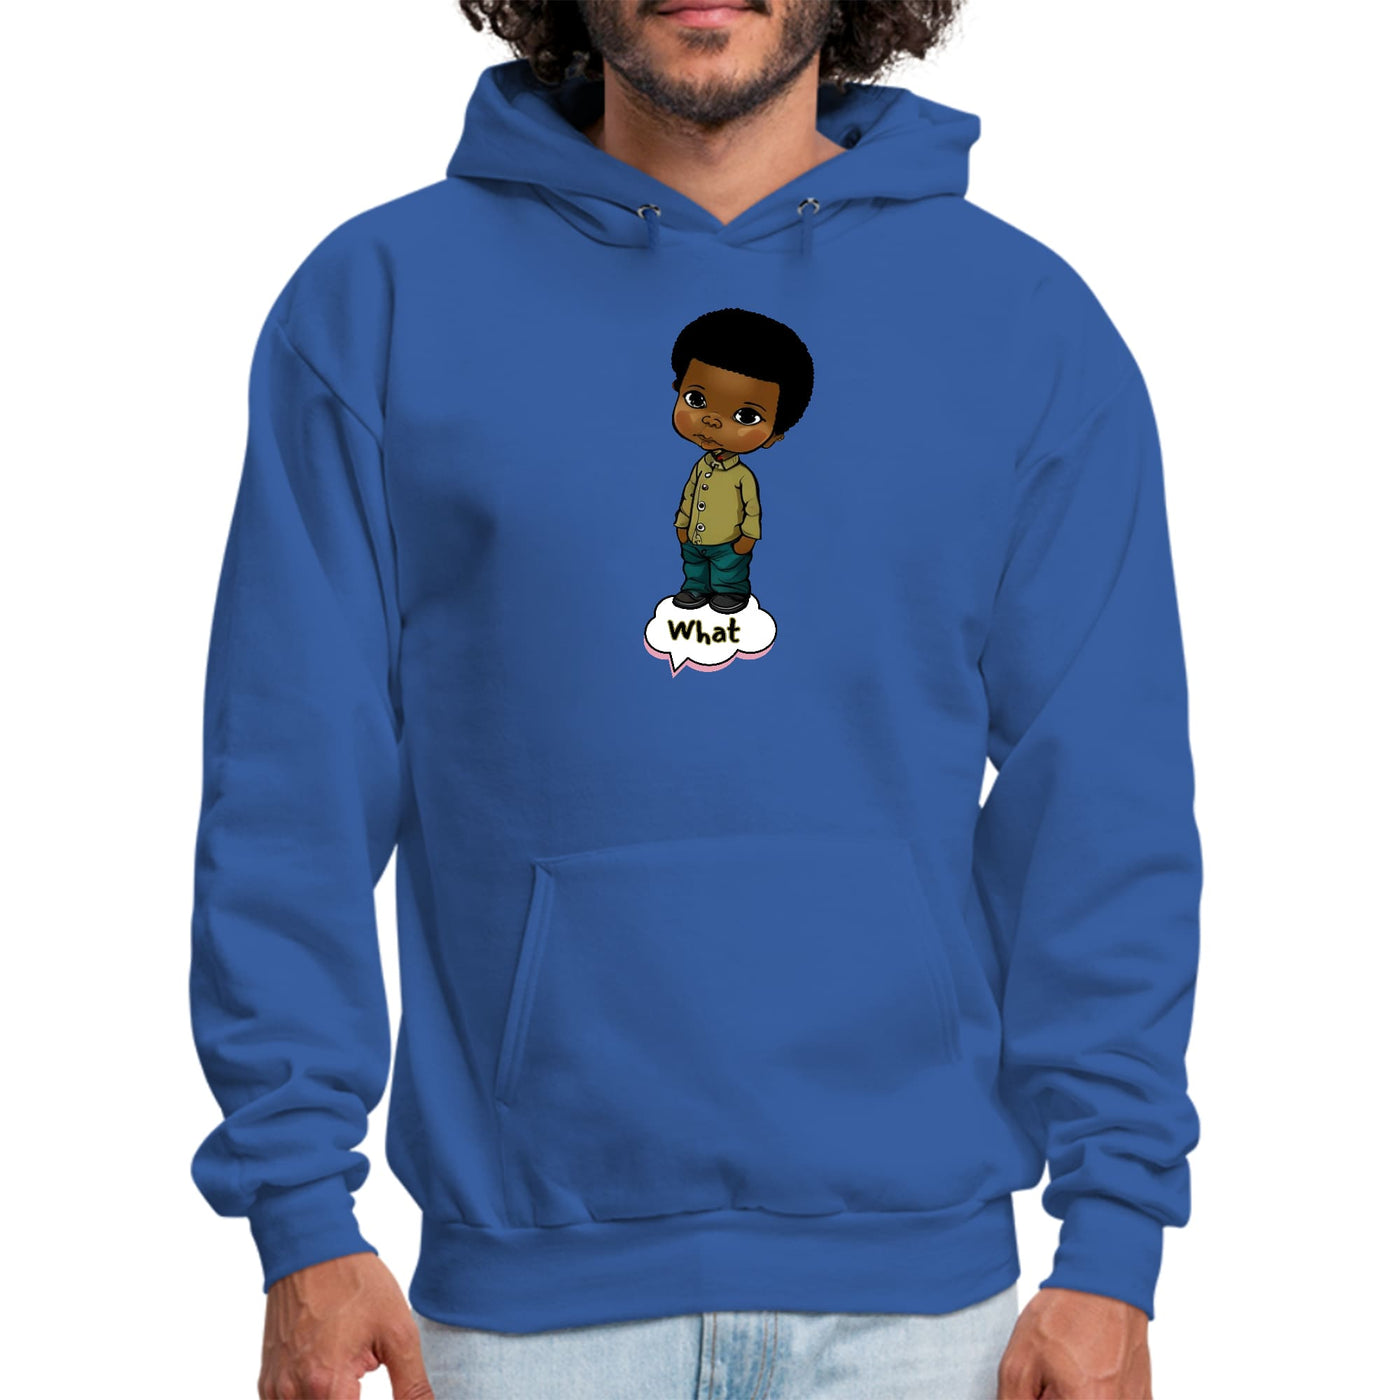 Mens Graphic Hoodie What African American Boy Illustration Art - Unisex